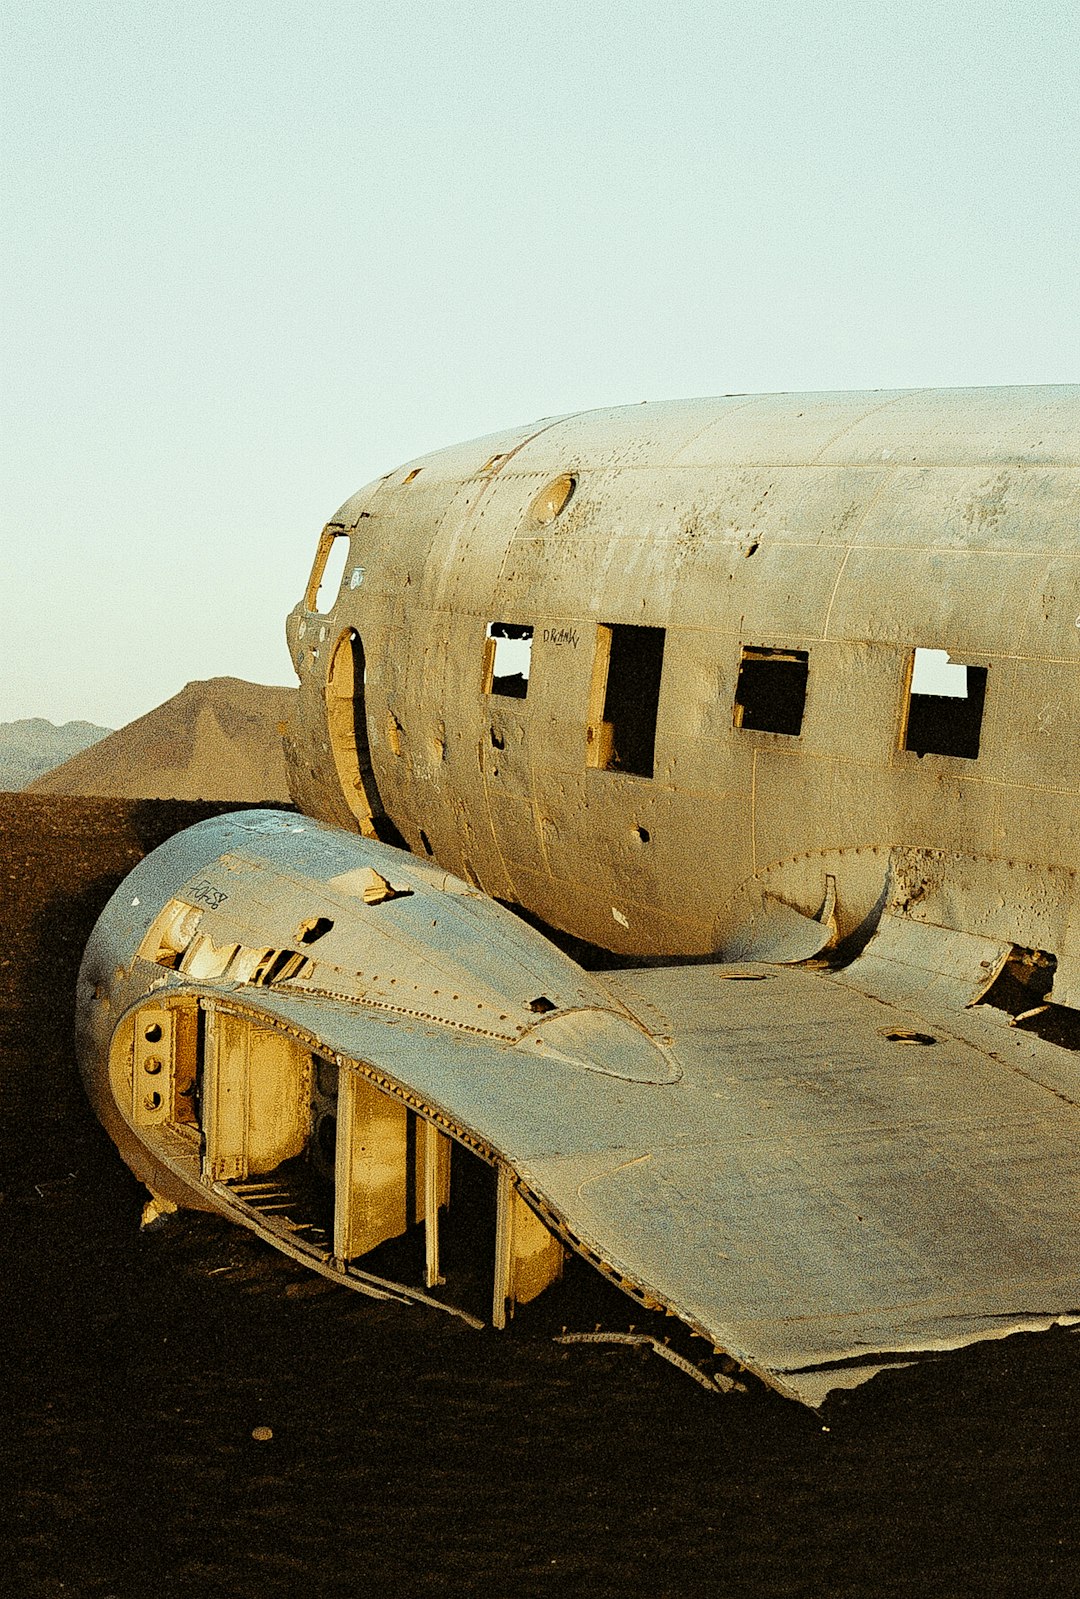 wrecked white and brown airplane